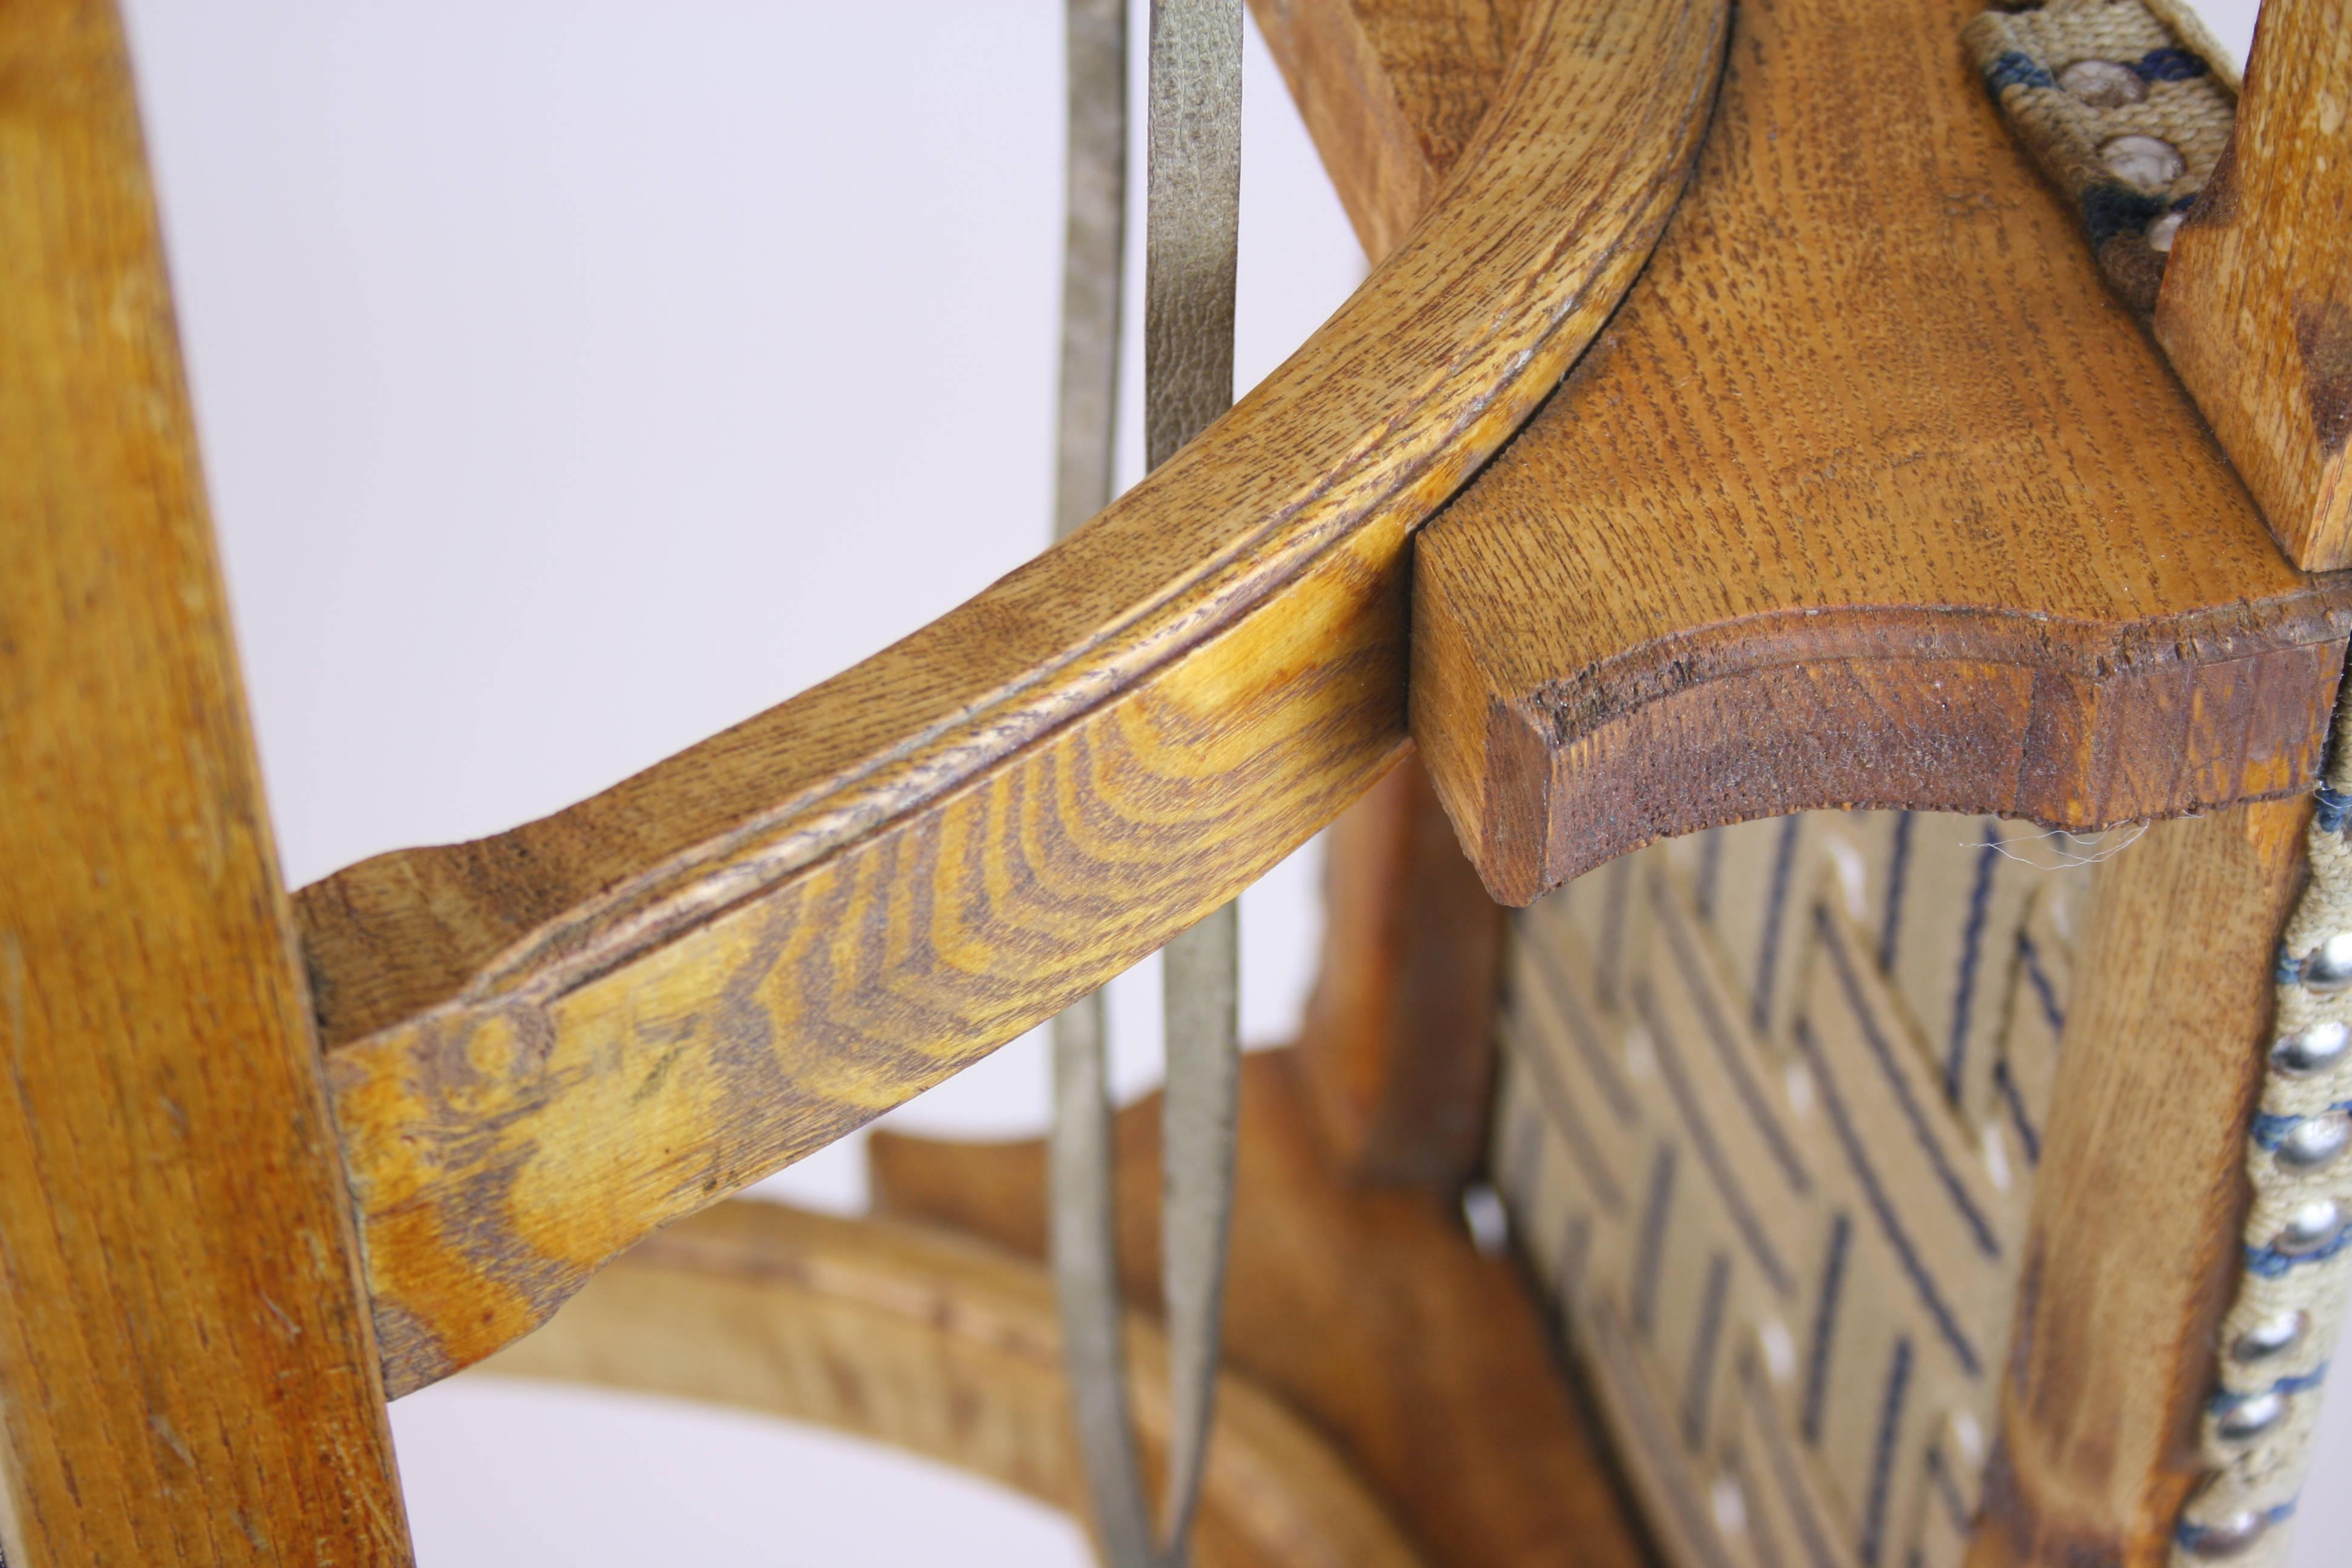 Carved 19th Century Sled Manufactured in Ramsau, Austria